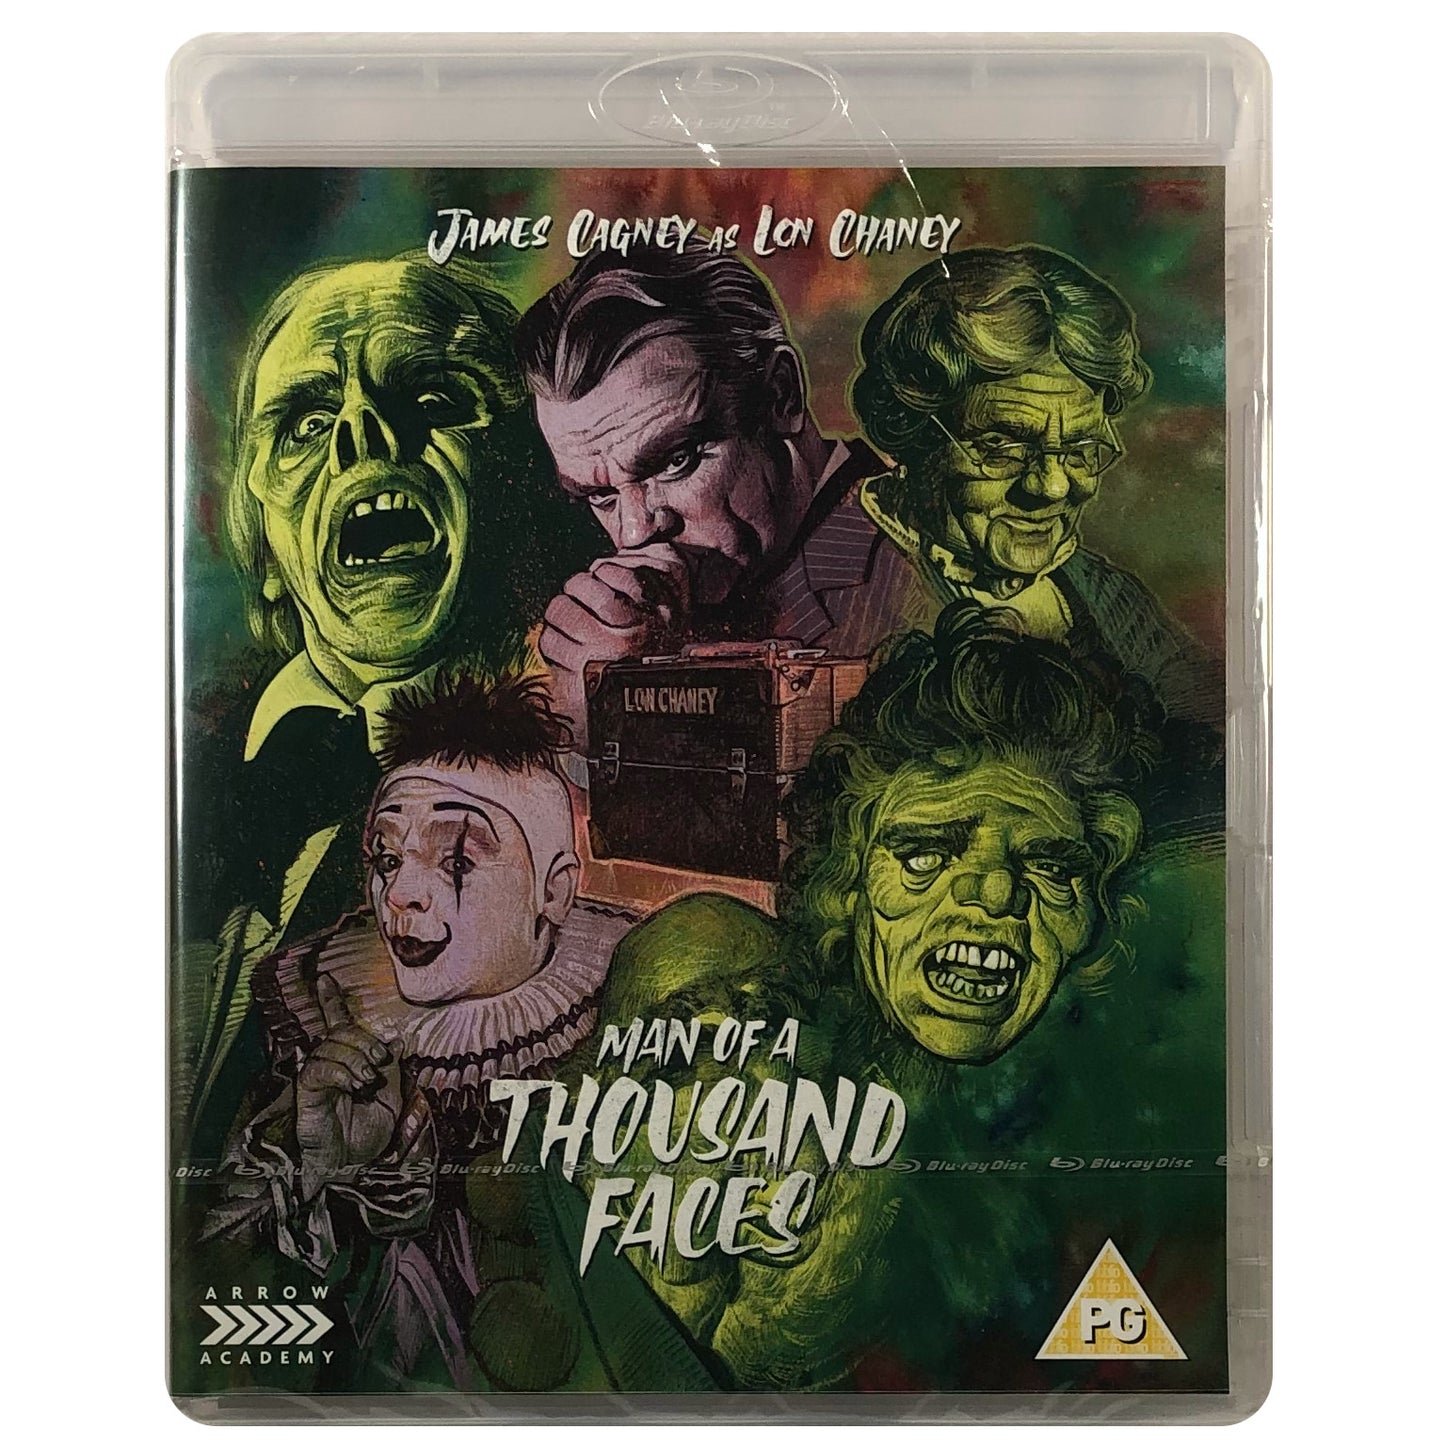 Man Of A Thousand Faces Blu-Ray